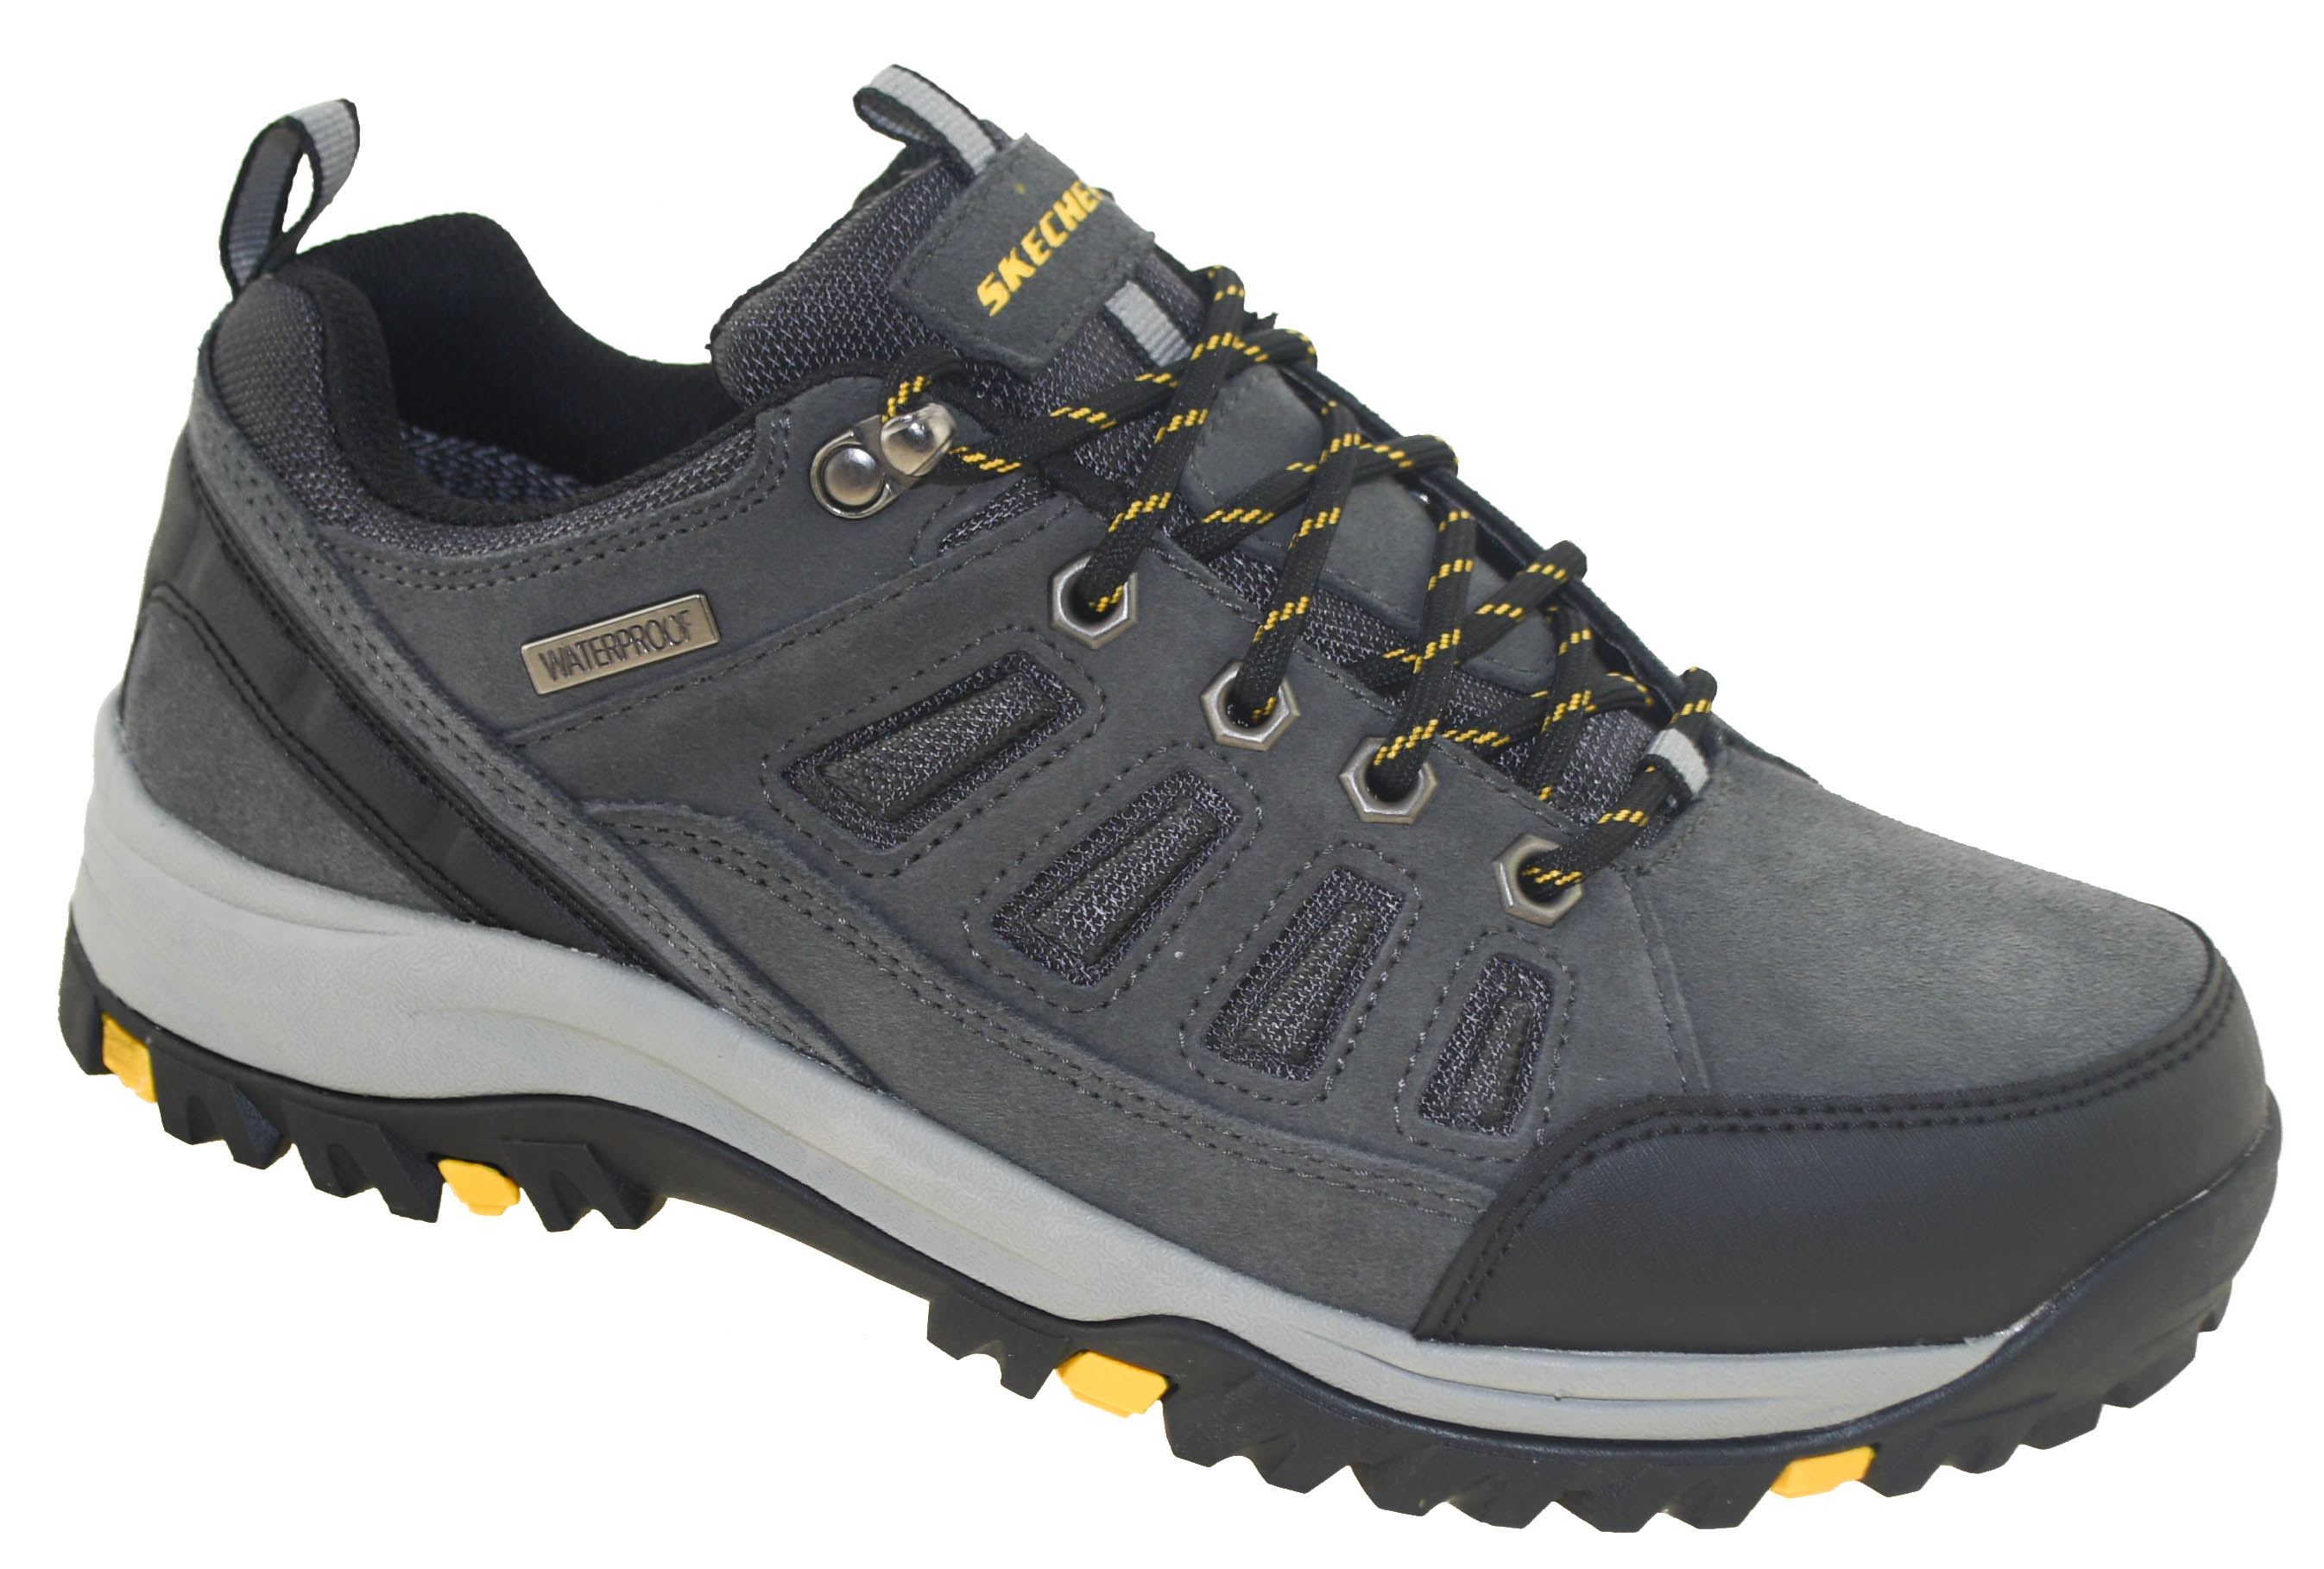 skechers hiking boots